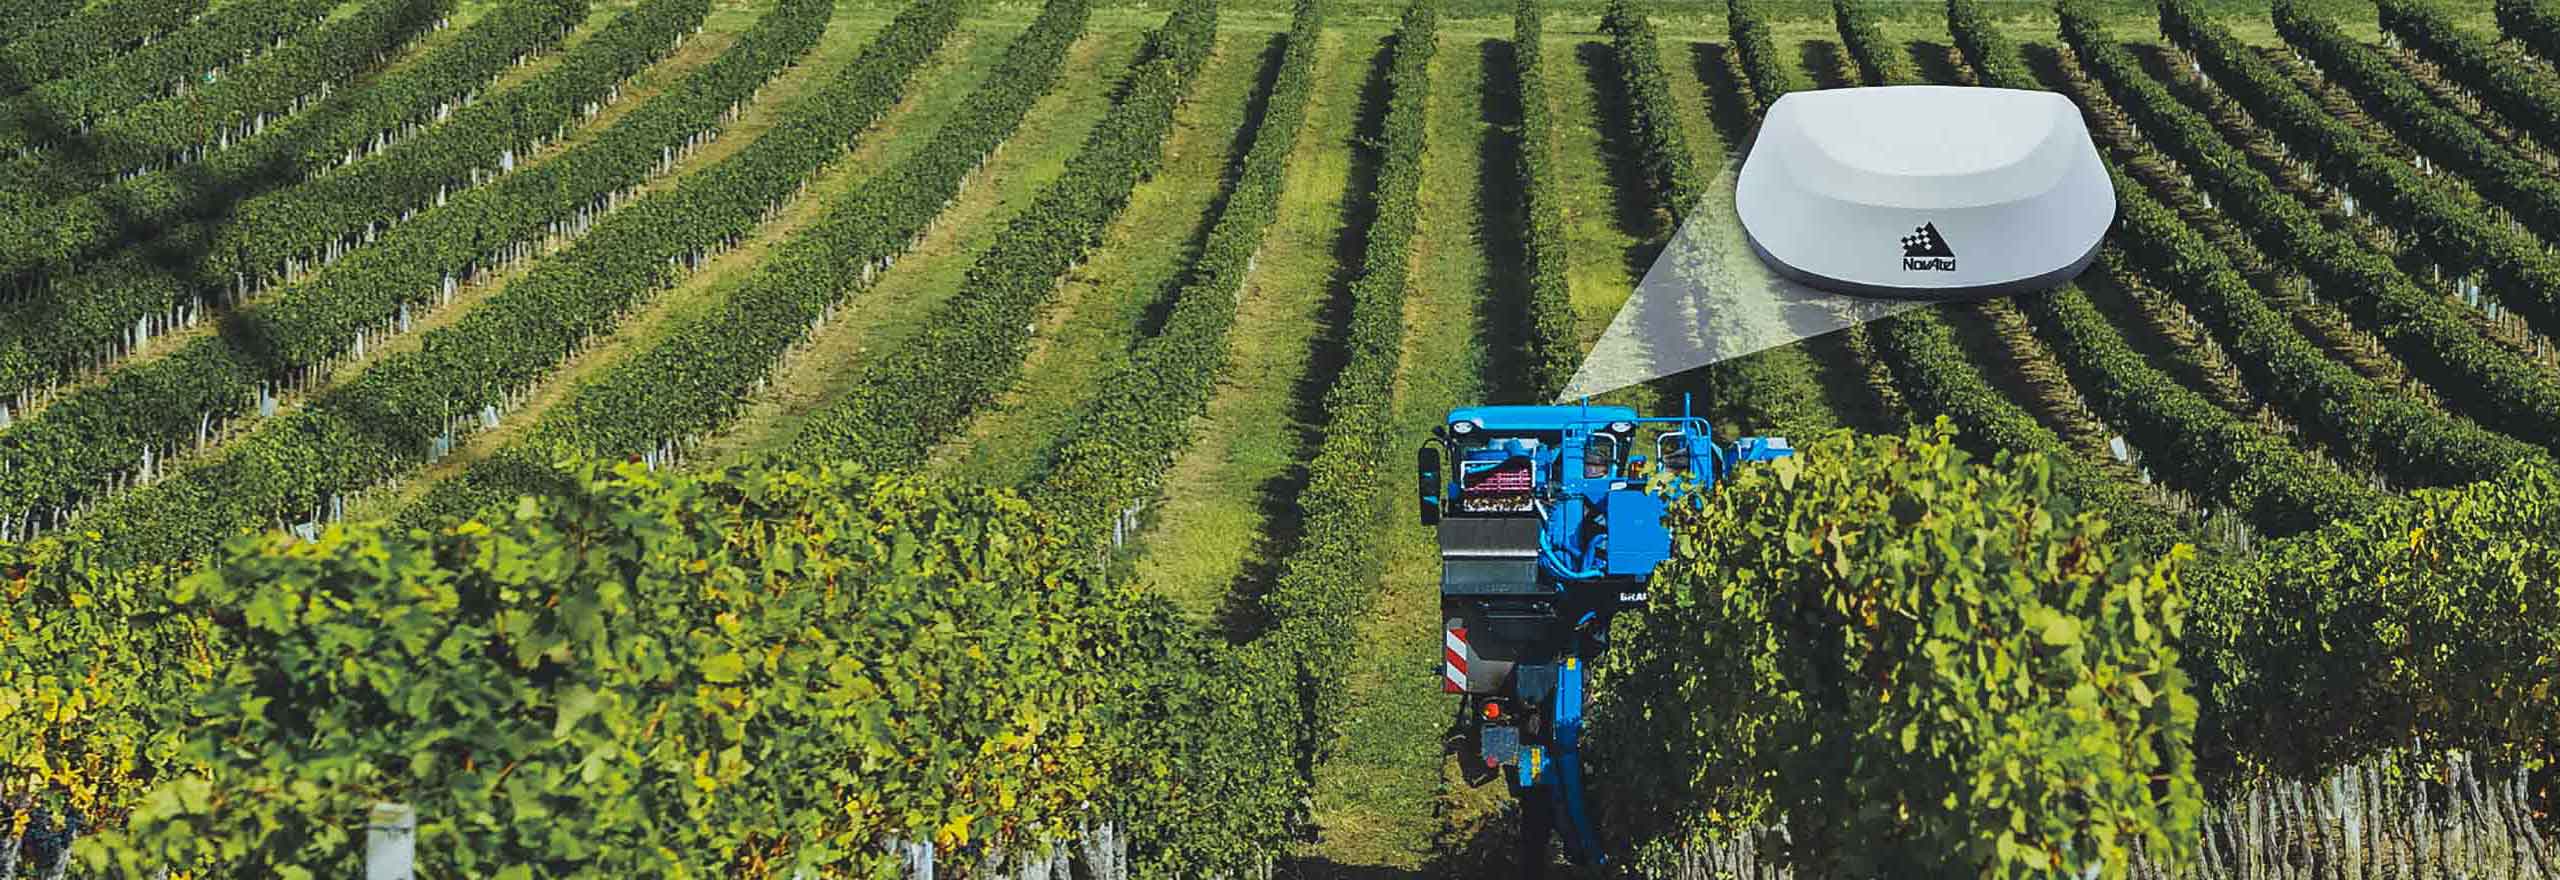 Sprayer in an orchard with a GNSS SMART antenna on the roof.